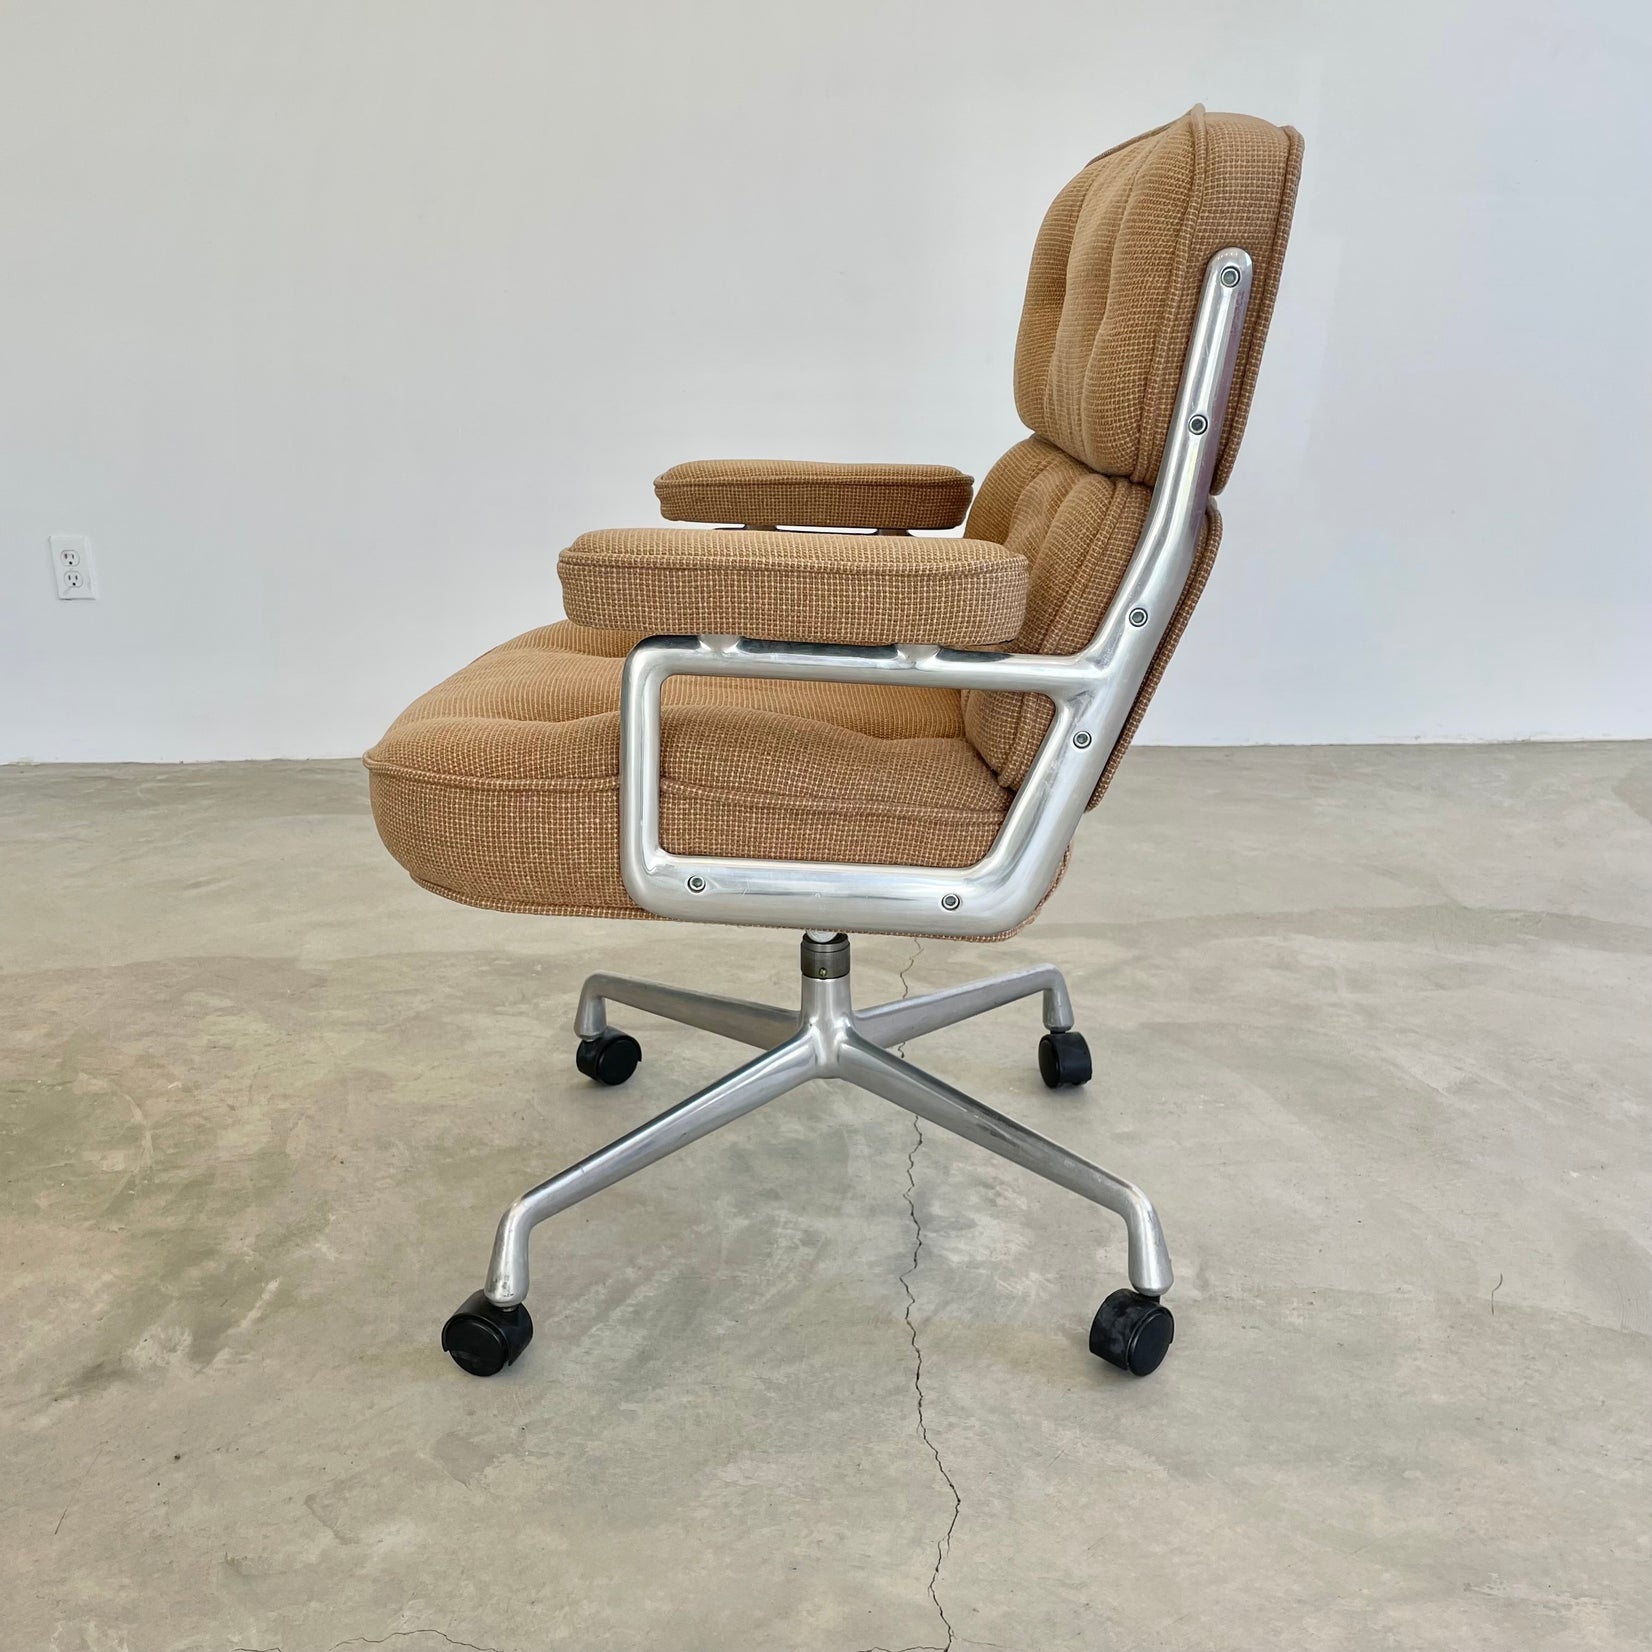 Eames Time Life Chair in Tan Burlap, 1984 USA